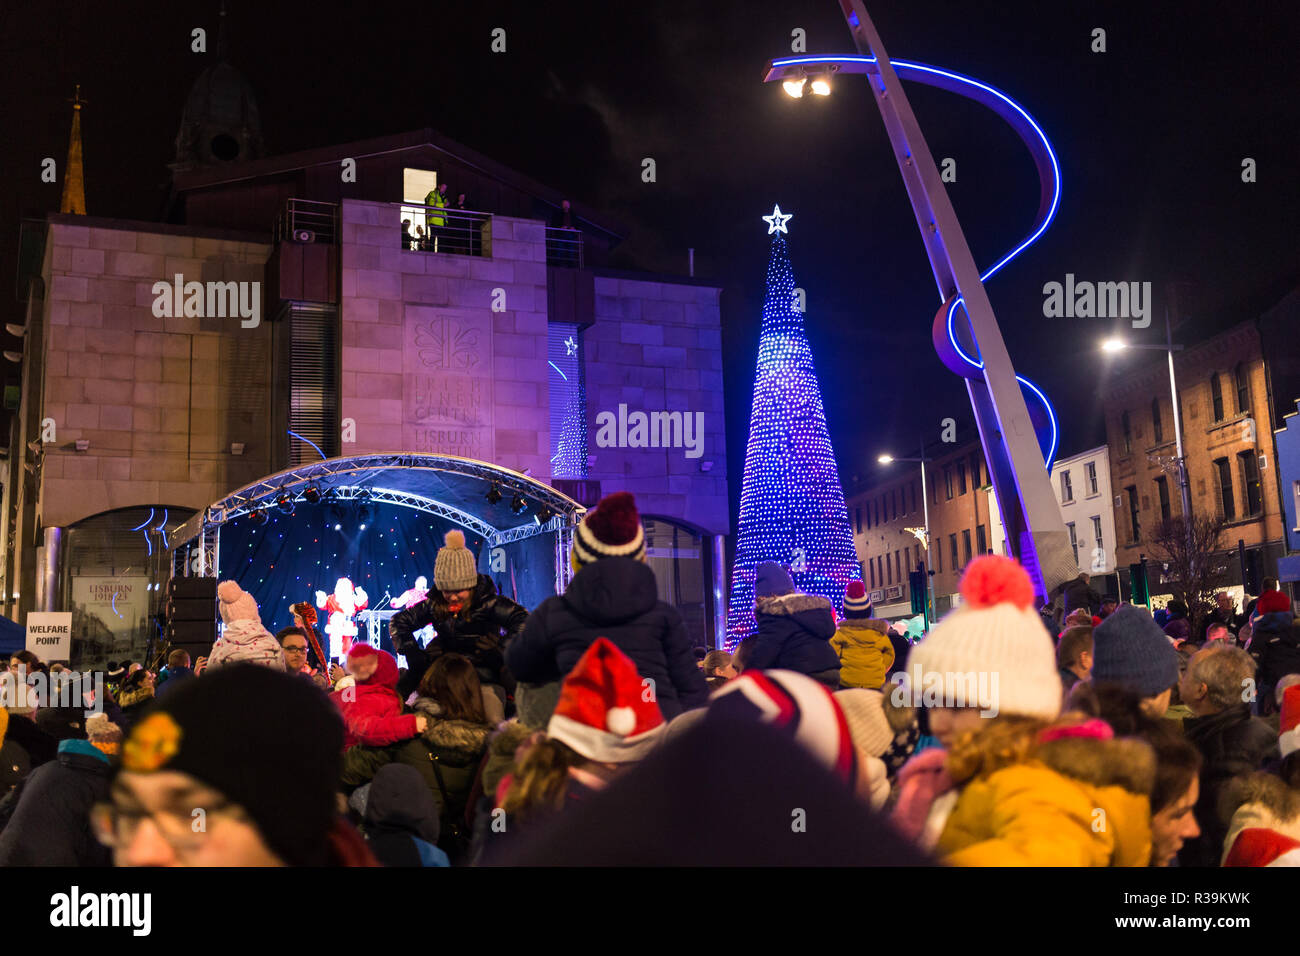 Lisburn, Northern Ireland, 22nd November, 2018. Crowds of people, including many young families, line Bow Street and Market Square in Lisburn city centre to watch a lantern parade involving local schoolchildren accompanied by carnival performers for the annual Christmas Lights Switch-On. It marks the start of Lisburn Light Festival, 22 November - 25 January, when over one million lights will illuminate the city centre. The Mayor, Councillor Uel Mackin switched on the Christmas lights ably assisted by Santa. Credit: Ian Proctor/Alamy Live News Stock Photo